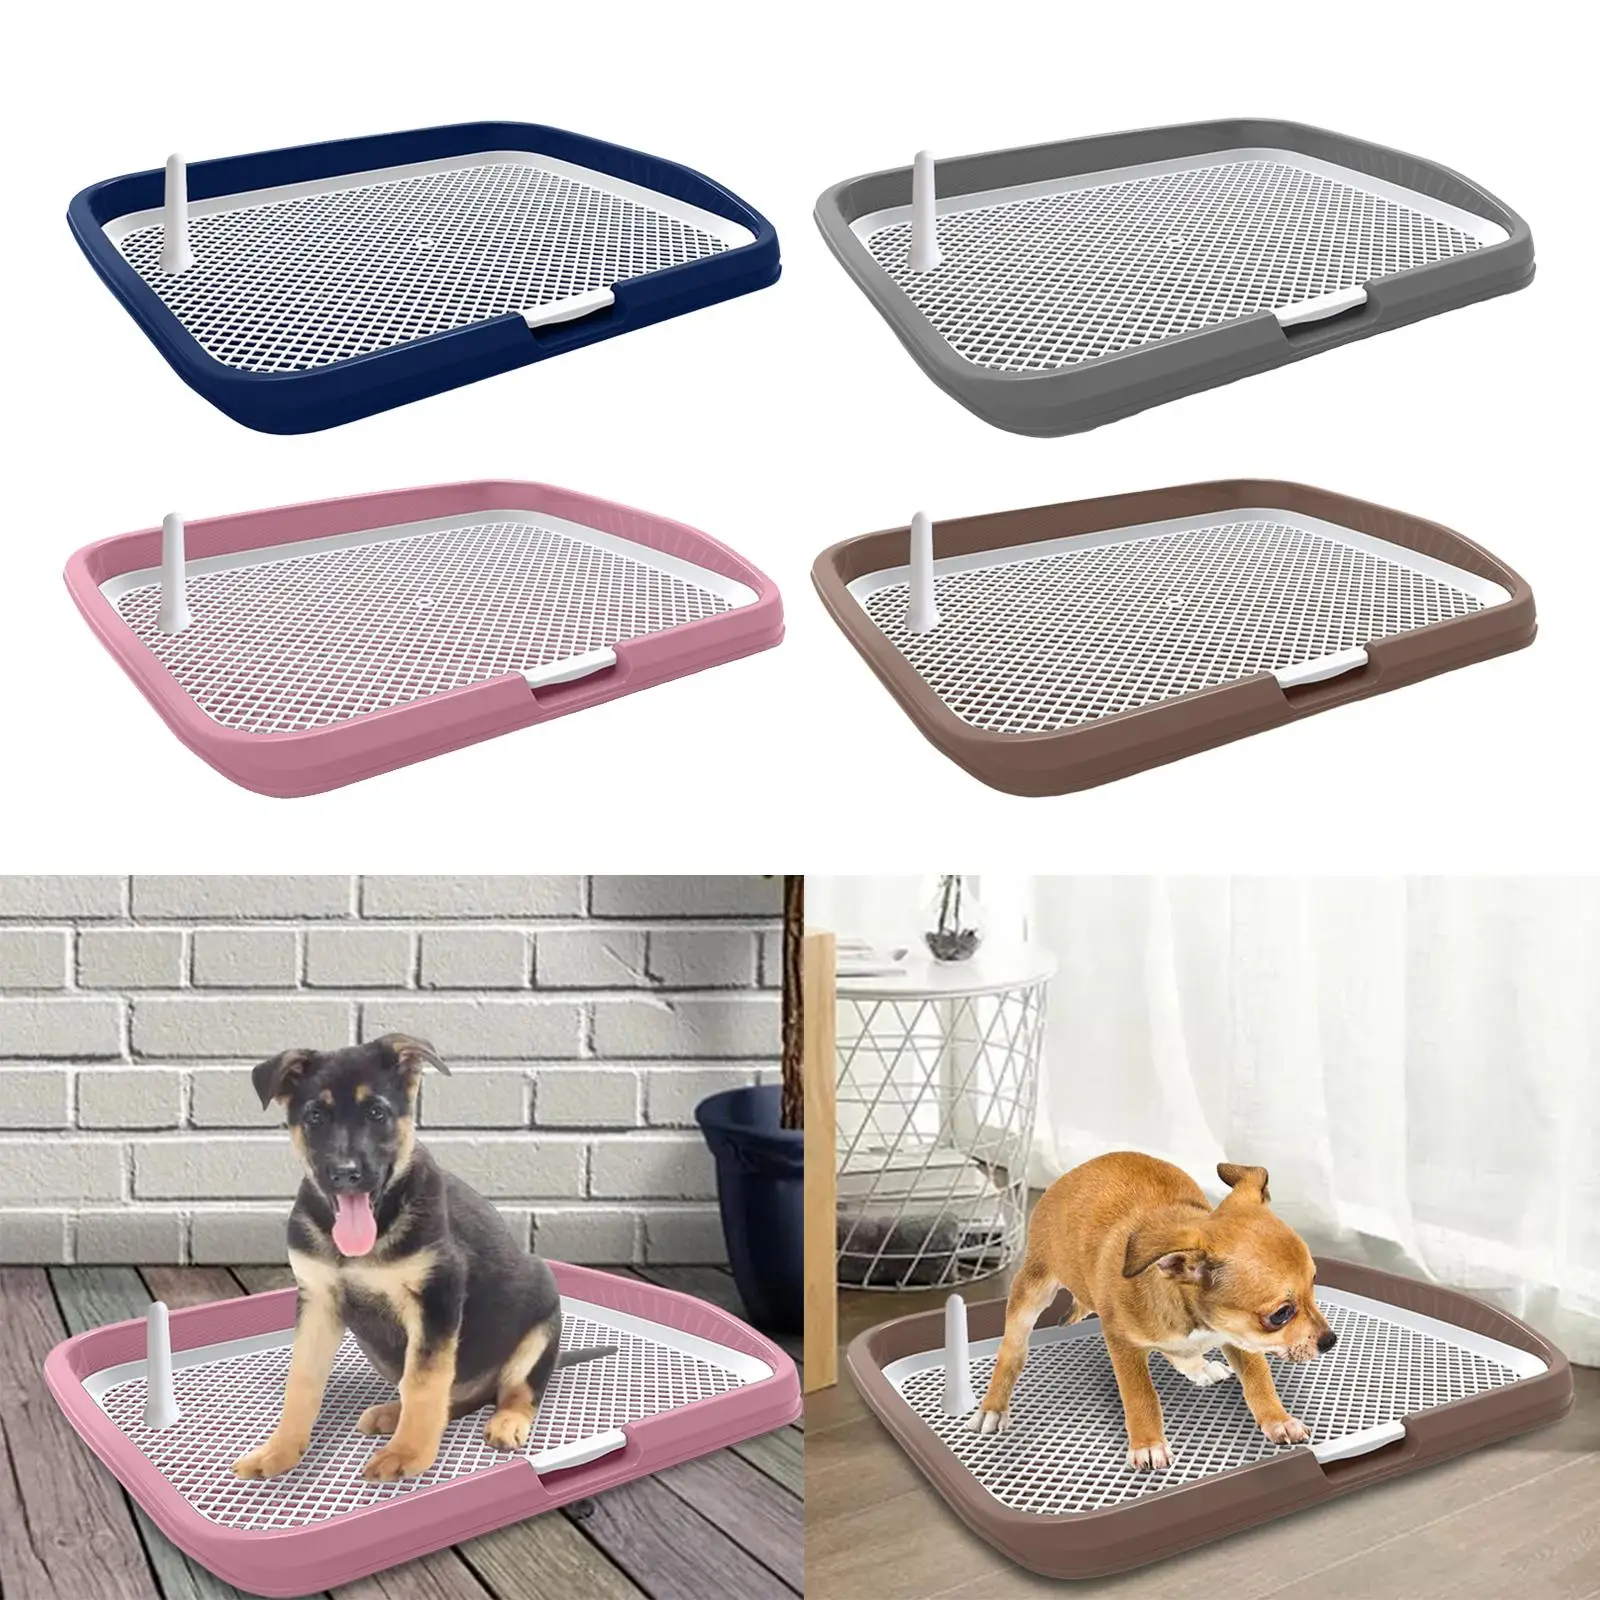 Pet Dog Training Toilet Tray Pet Toilet Potty Pad Holder Keep Paws Clean with